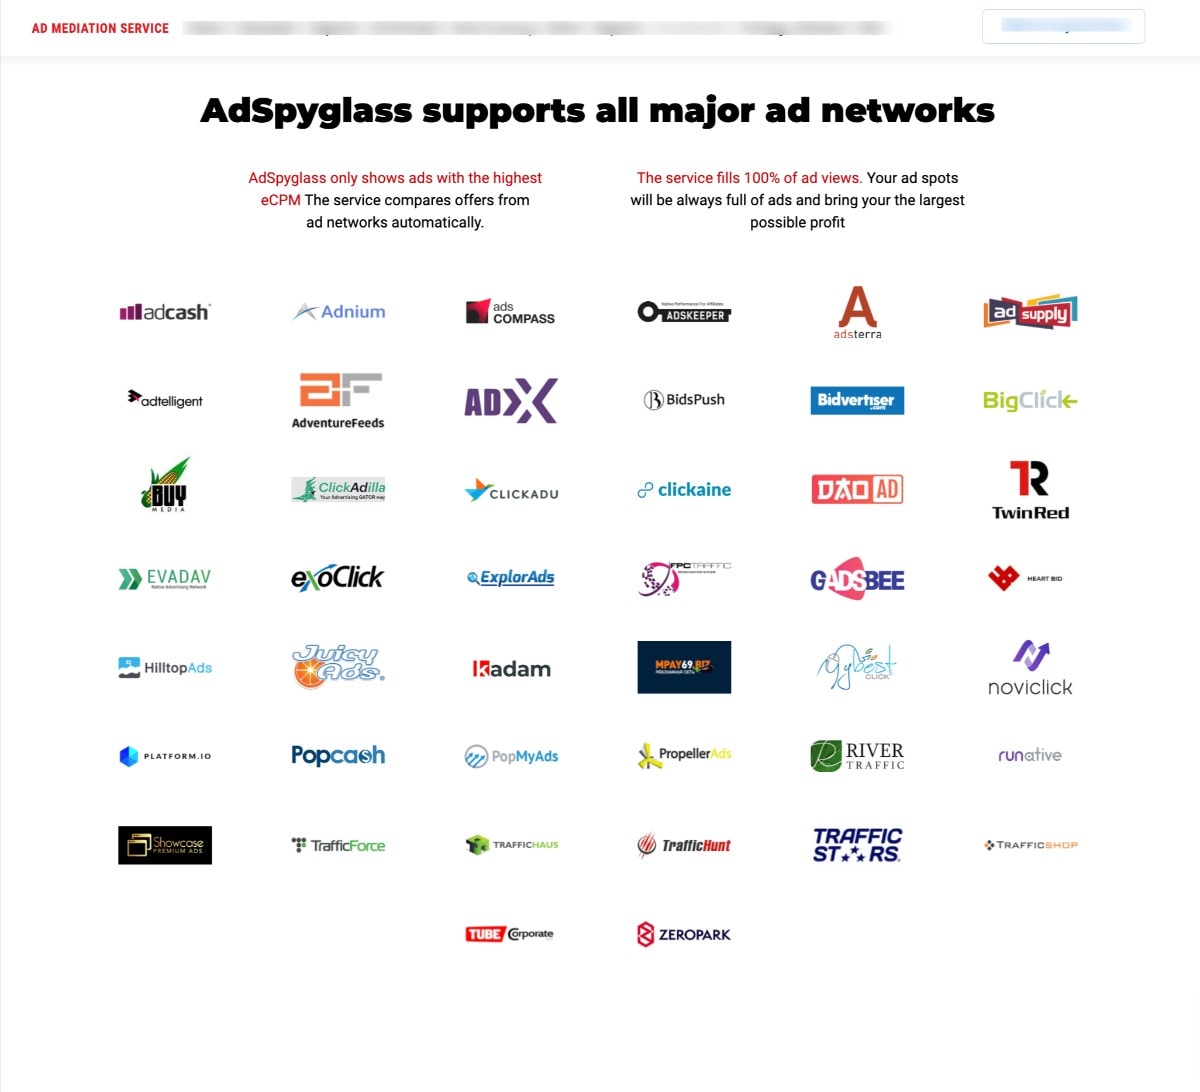 adspyglass supports networks